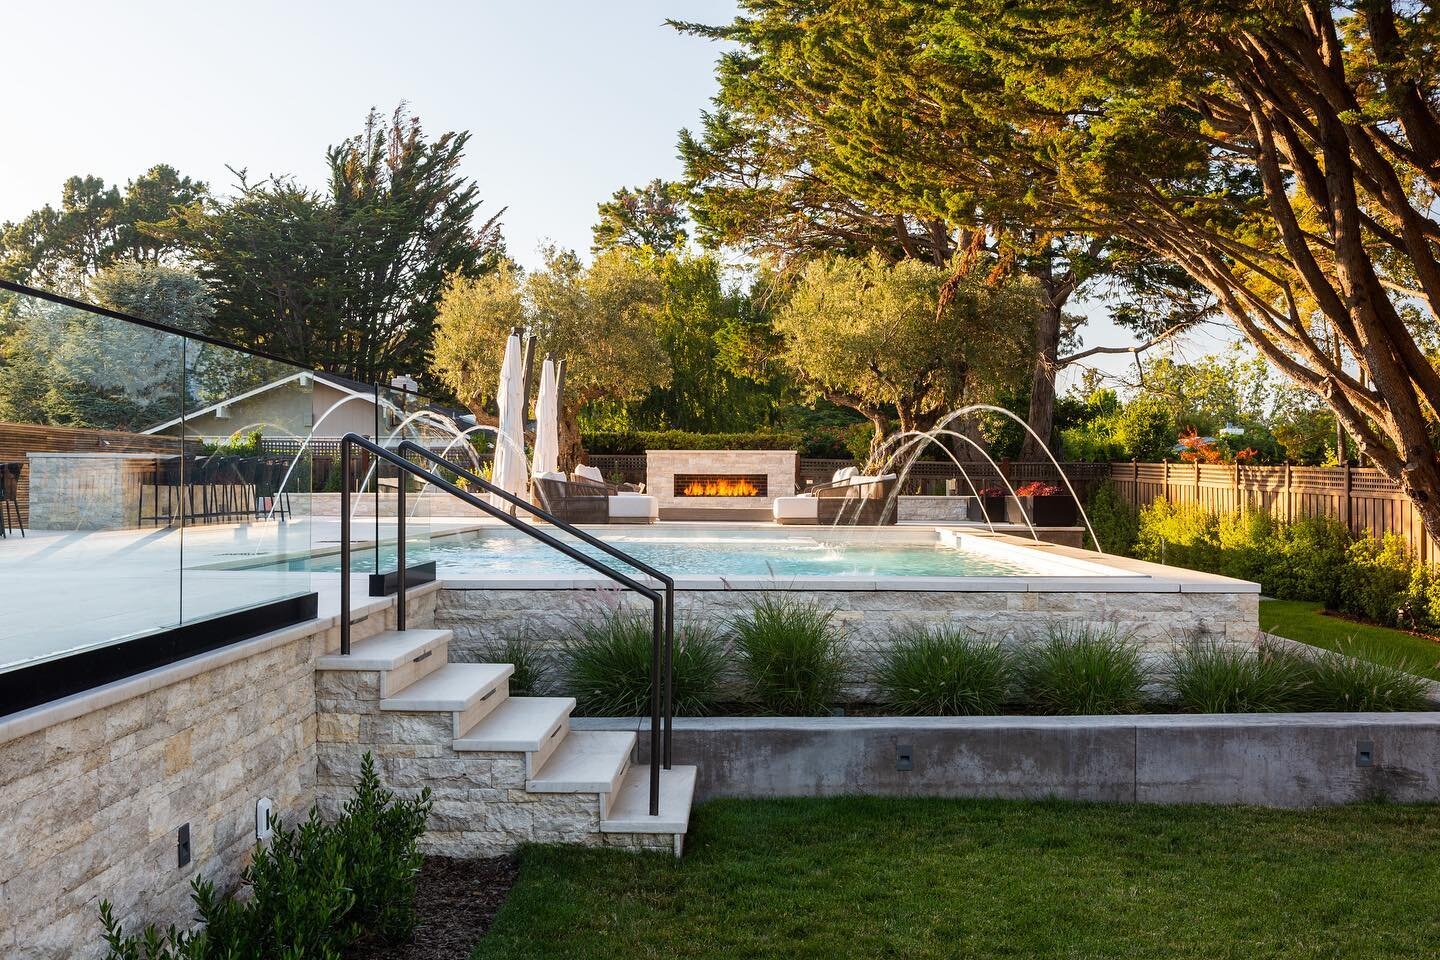 Beauty from every angle! 
&bull;
&bull;
&bull;
#landscapearchitecture #firepit #dreamhome #beforeandafter #landscapedesign #contemporarydesign #beauty #landscapeconstruction #californialandscape #construction #customlandscape #luxury #stone #modern #